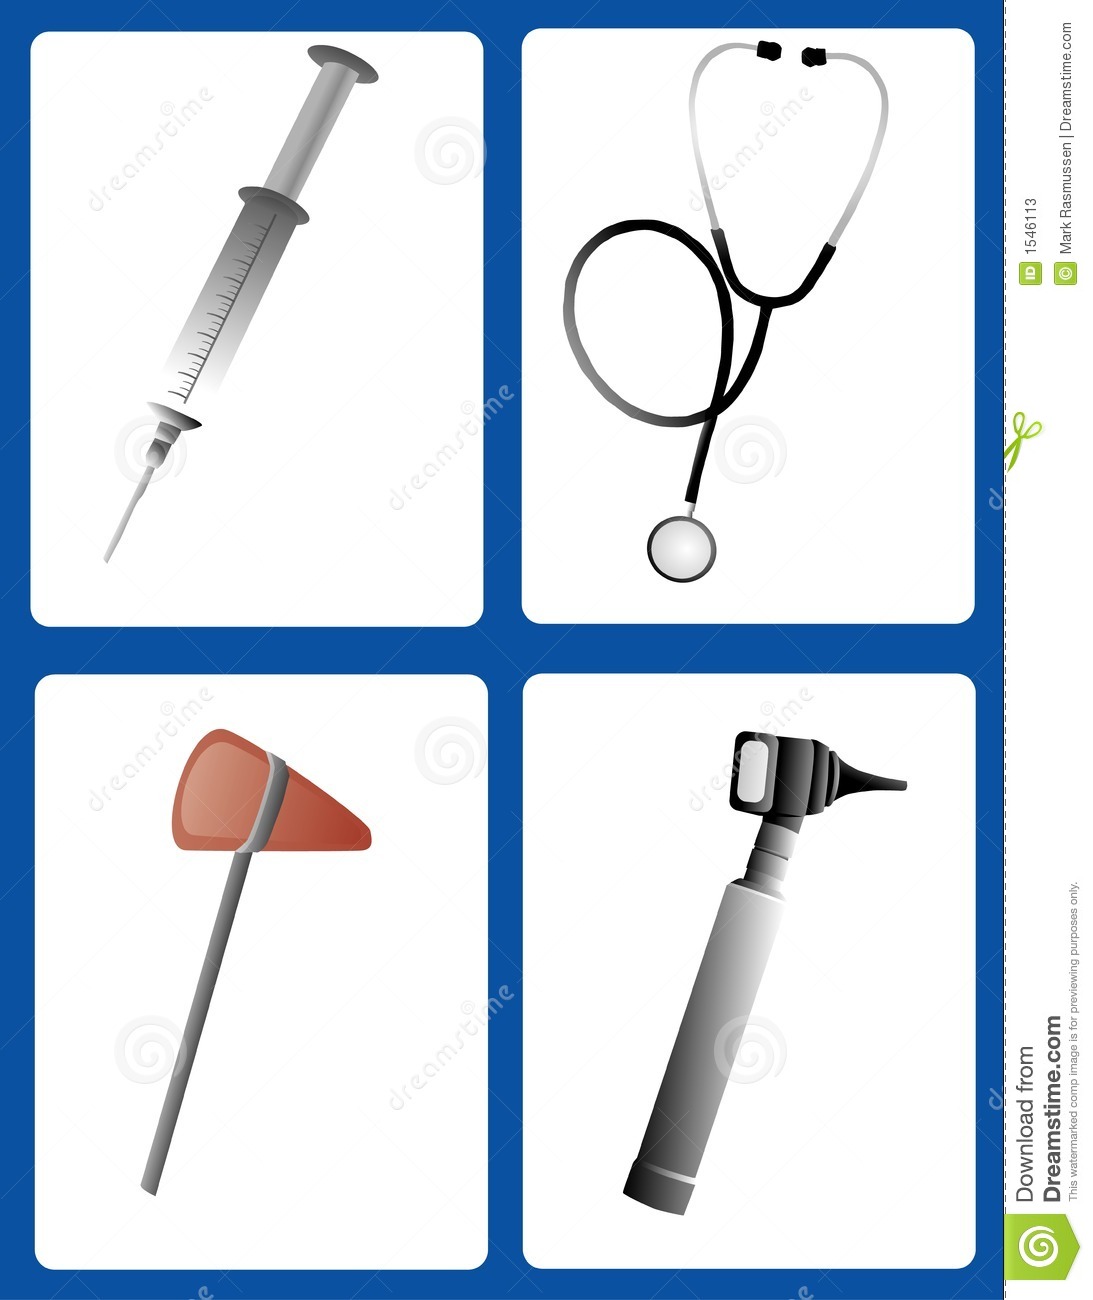 Doctor Tools Clipart   Clipart Panda   Free Clipart Images